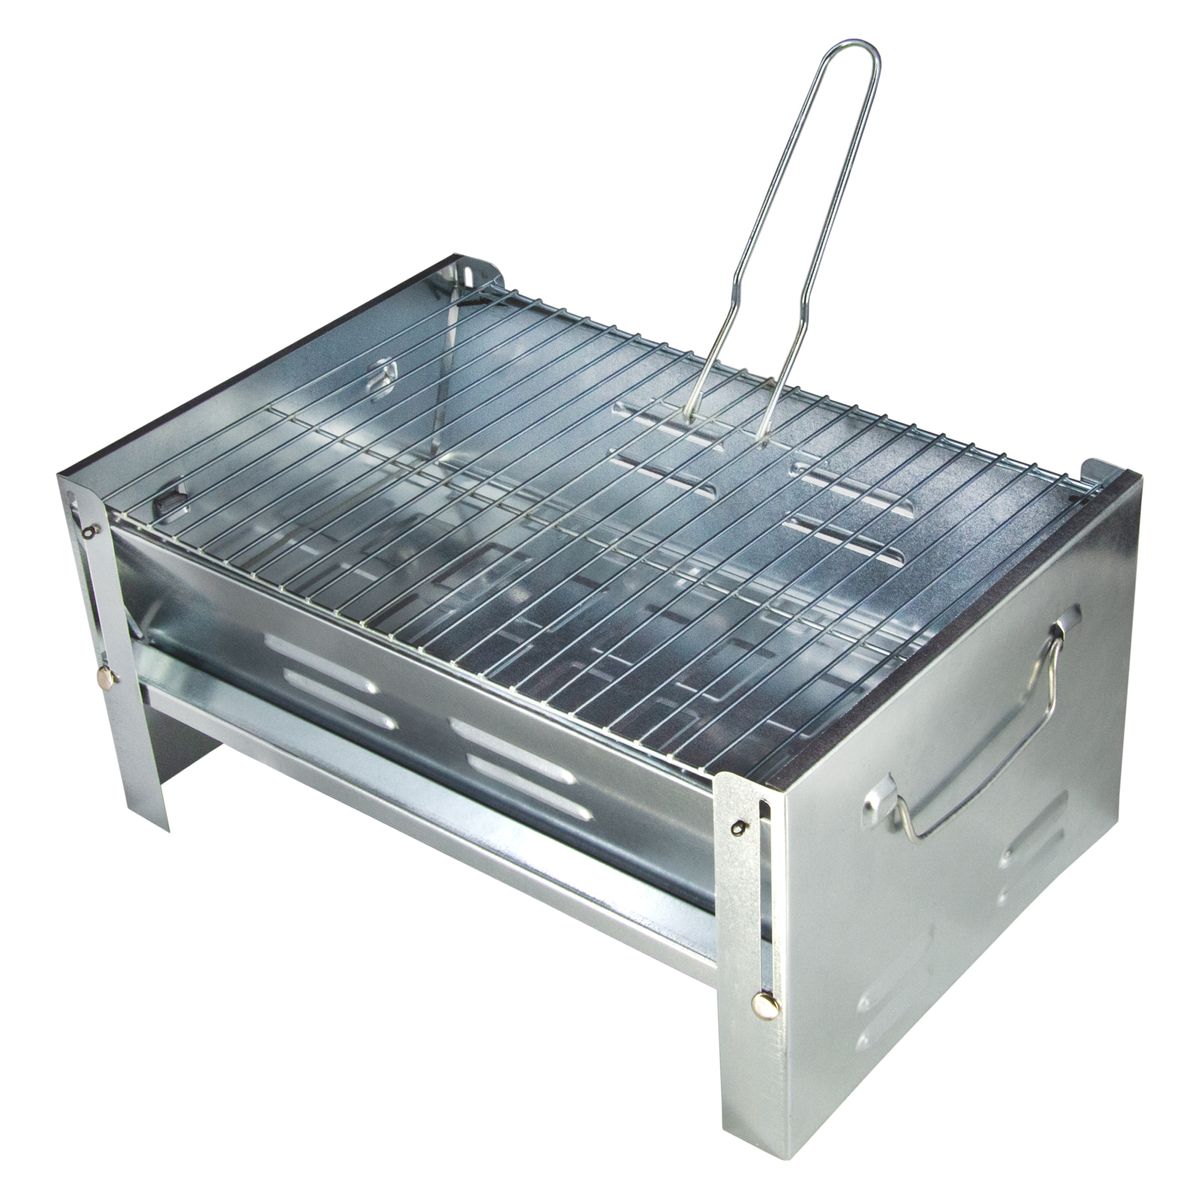 Mini BBQ Holzkohle Grill Tischgrill Klappgrill Camping Picknick Notebookgrill DE 